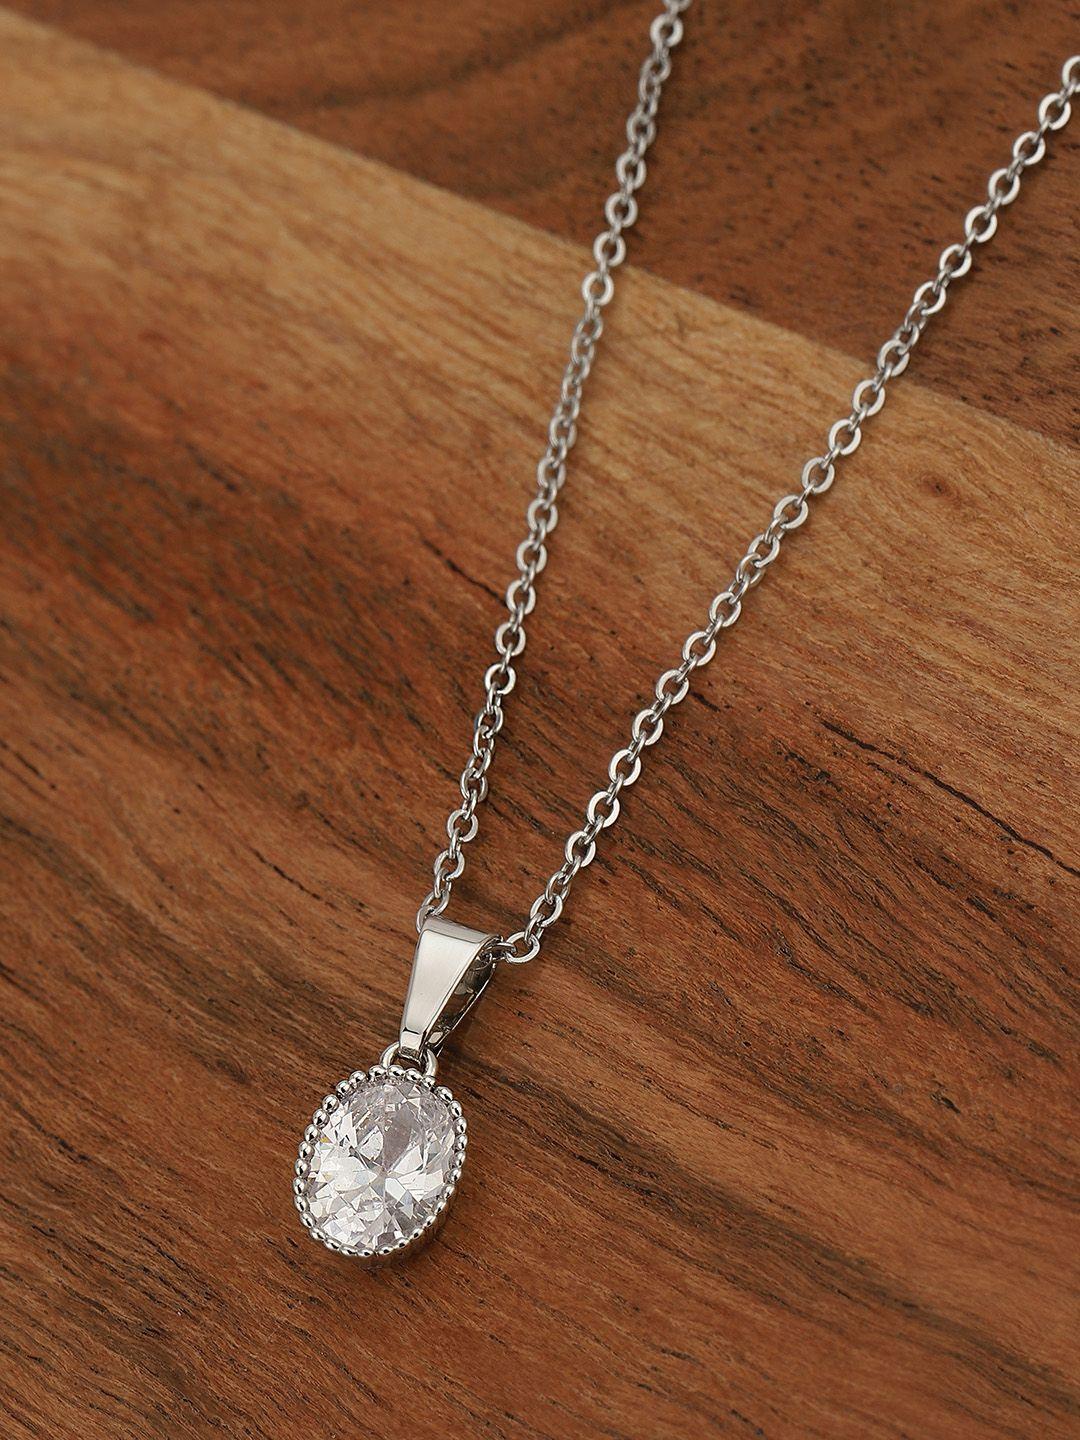 carlton-london-rhodium-plated-oval-pendant-with-chain